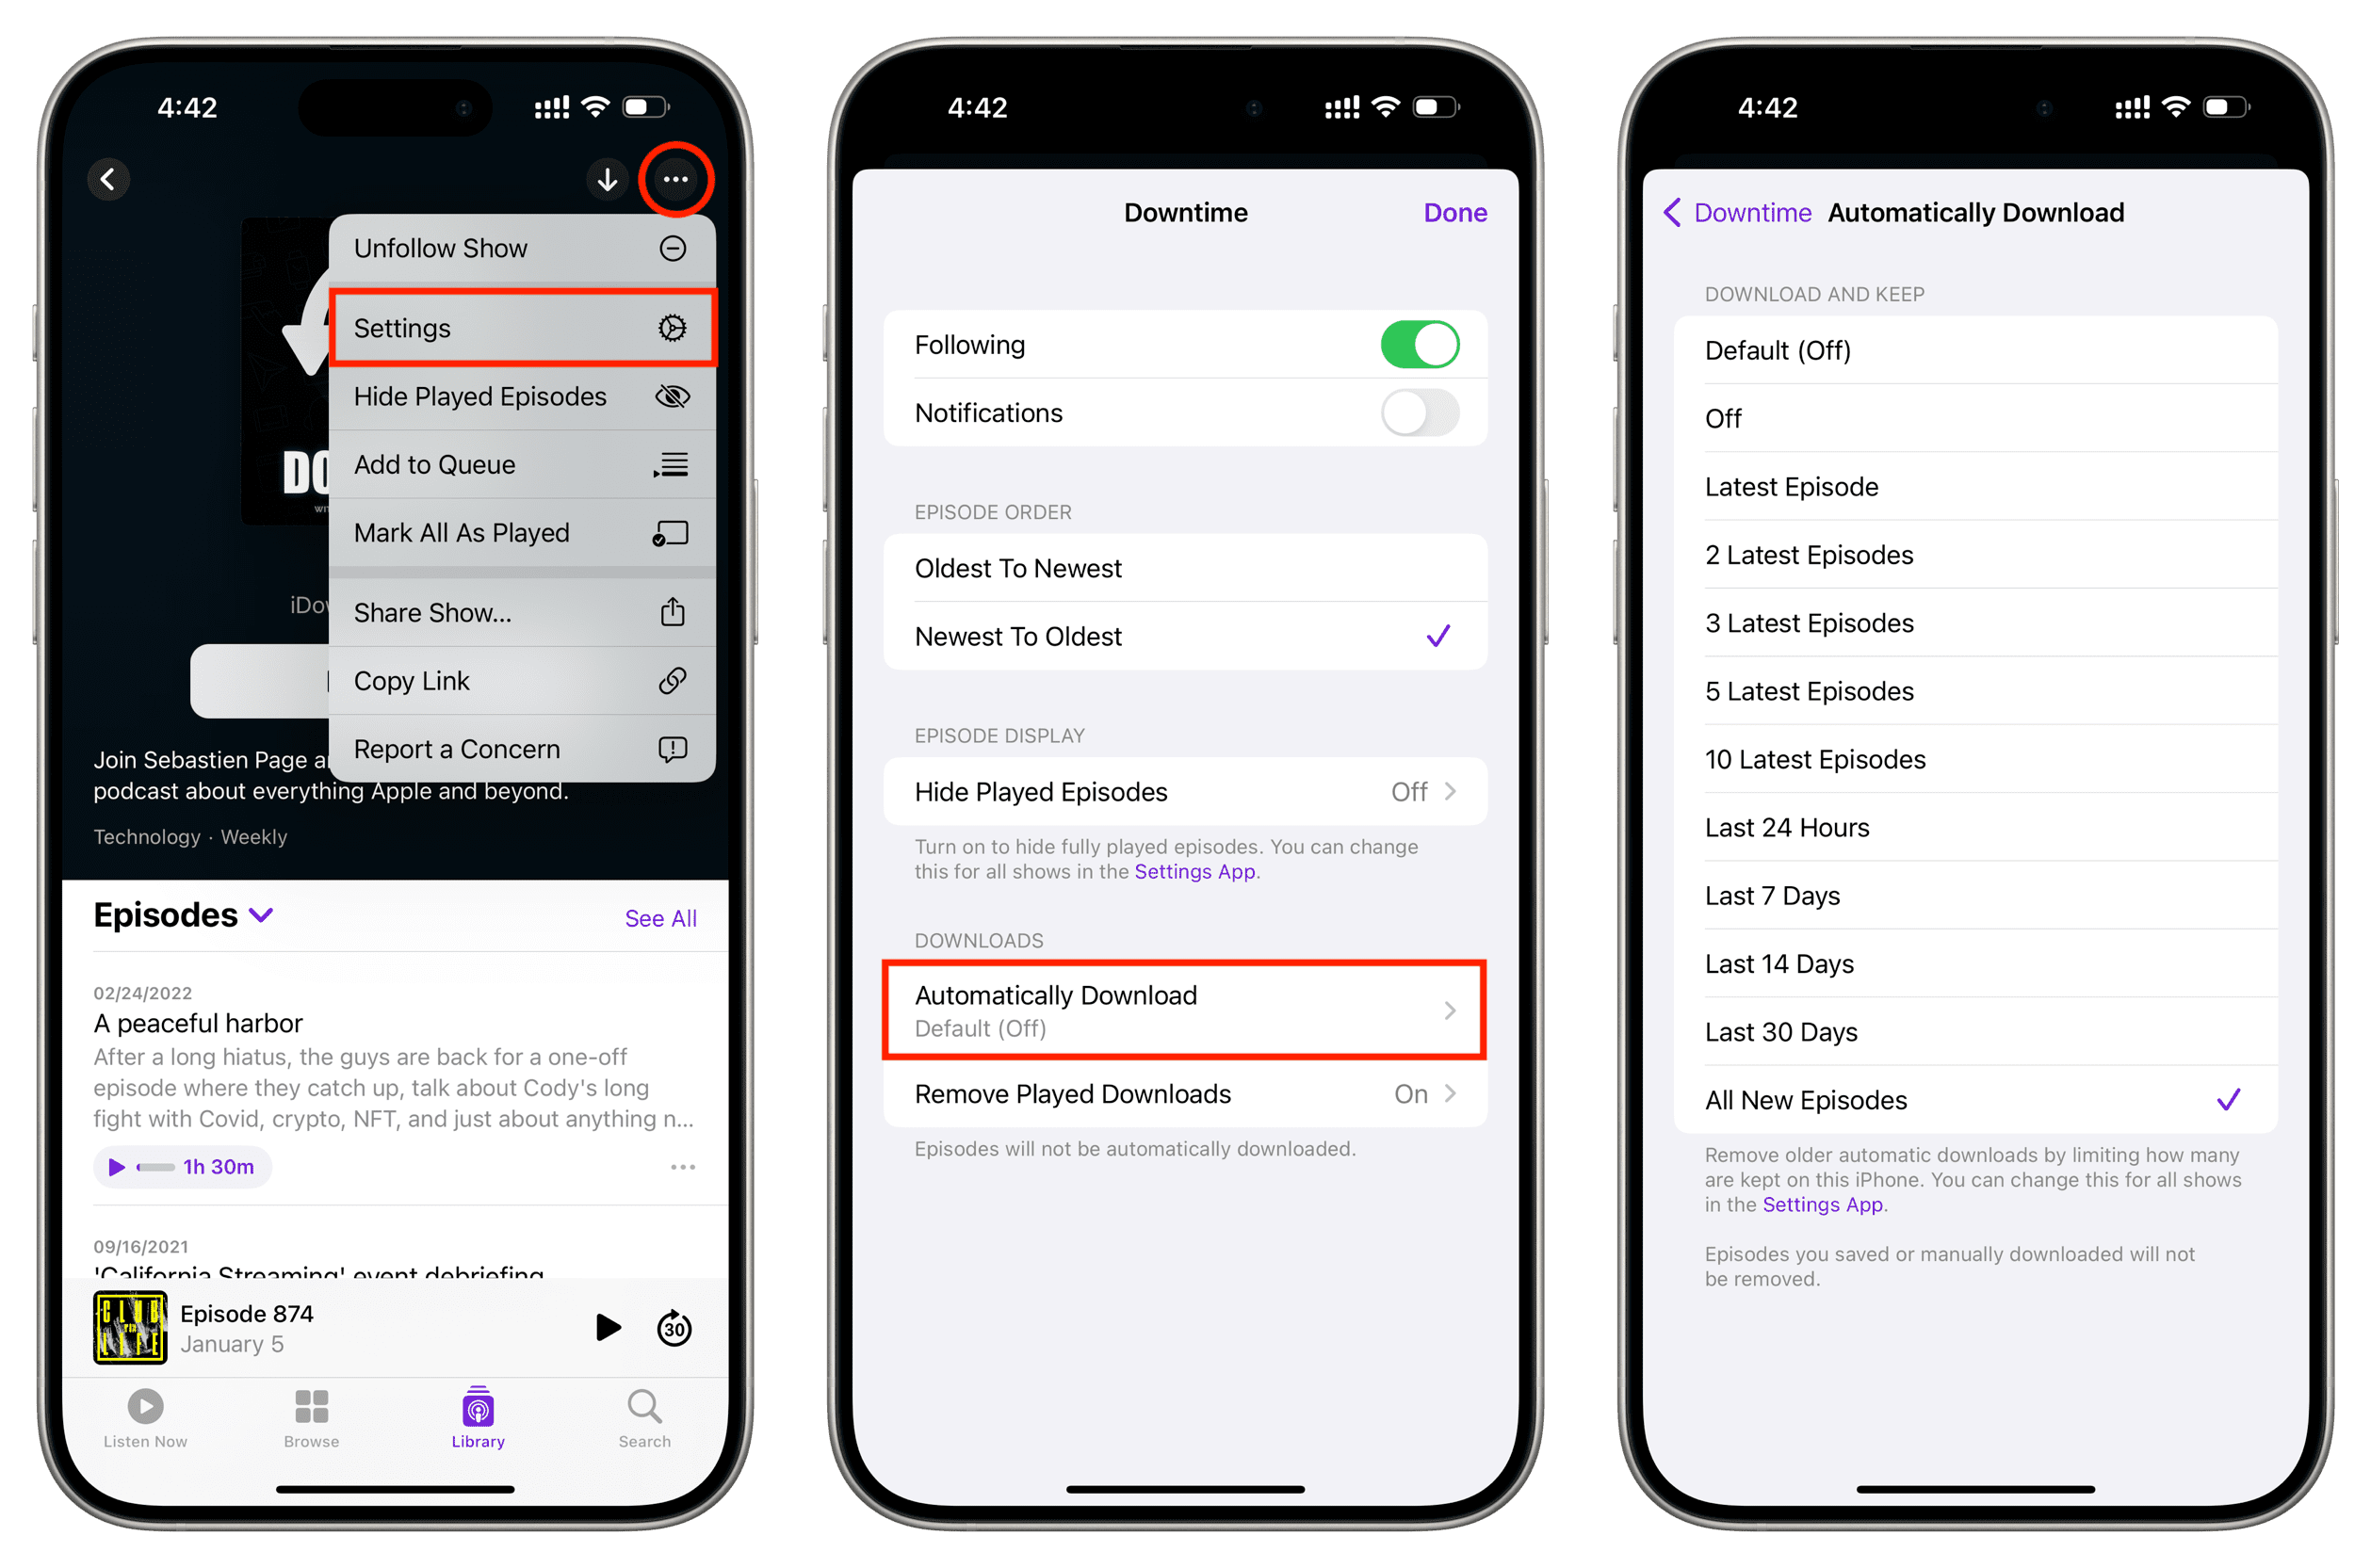 Automatic download settings for a particular podcast show on iPhone